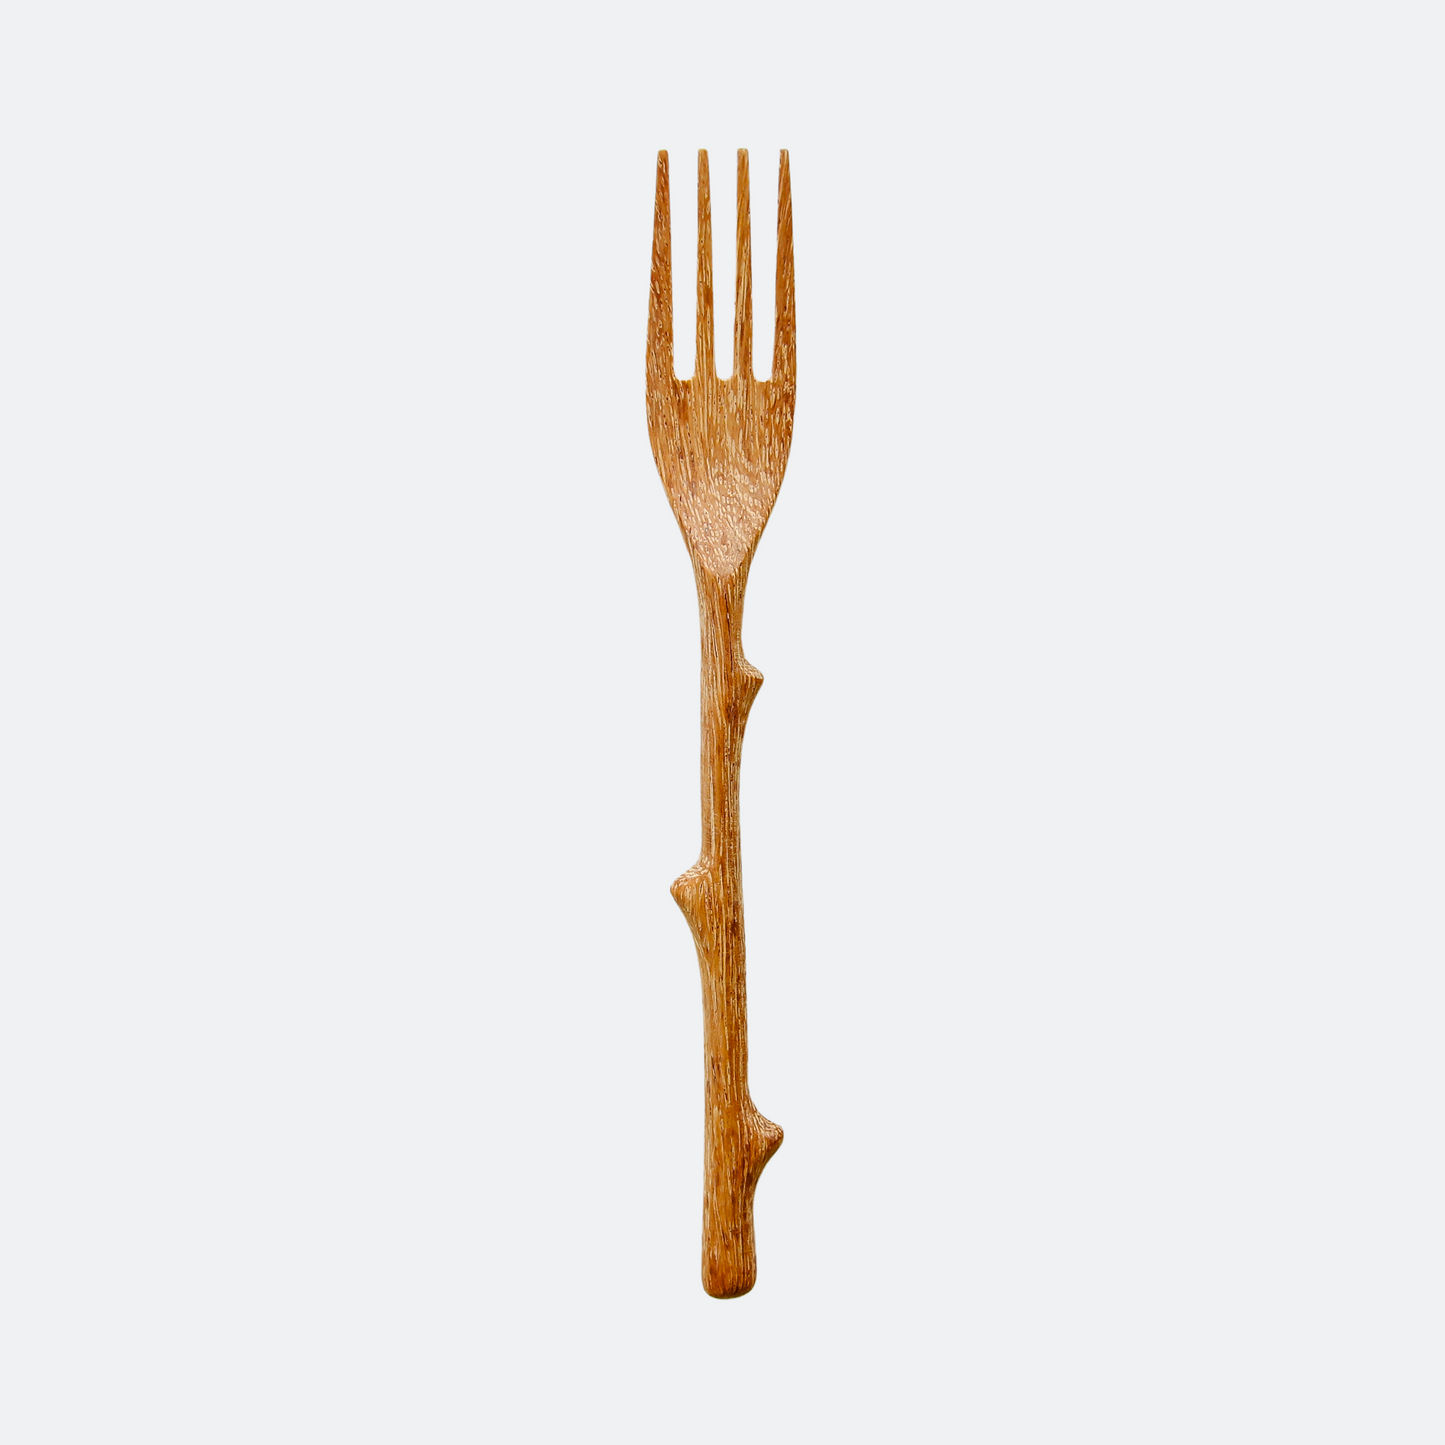 Handcrafted Branch Handle Wooden Forks